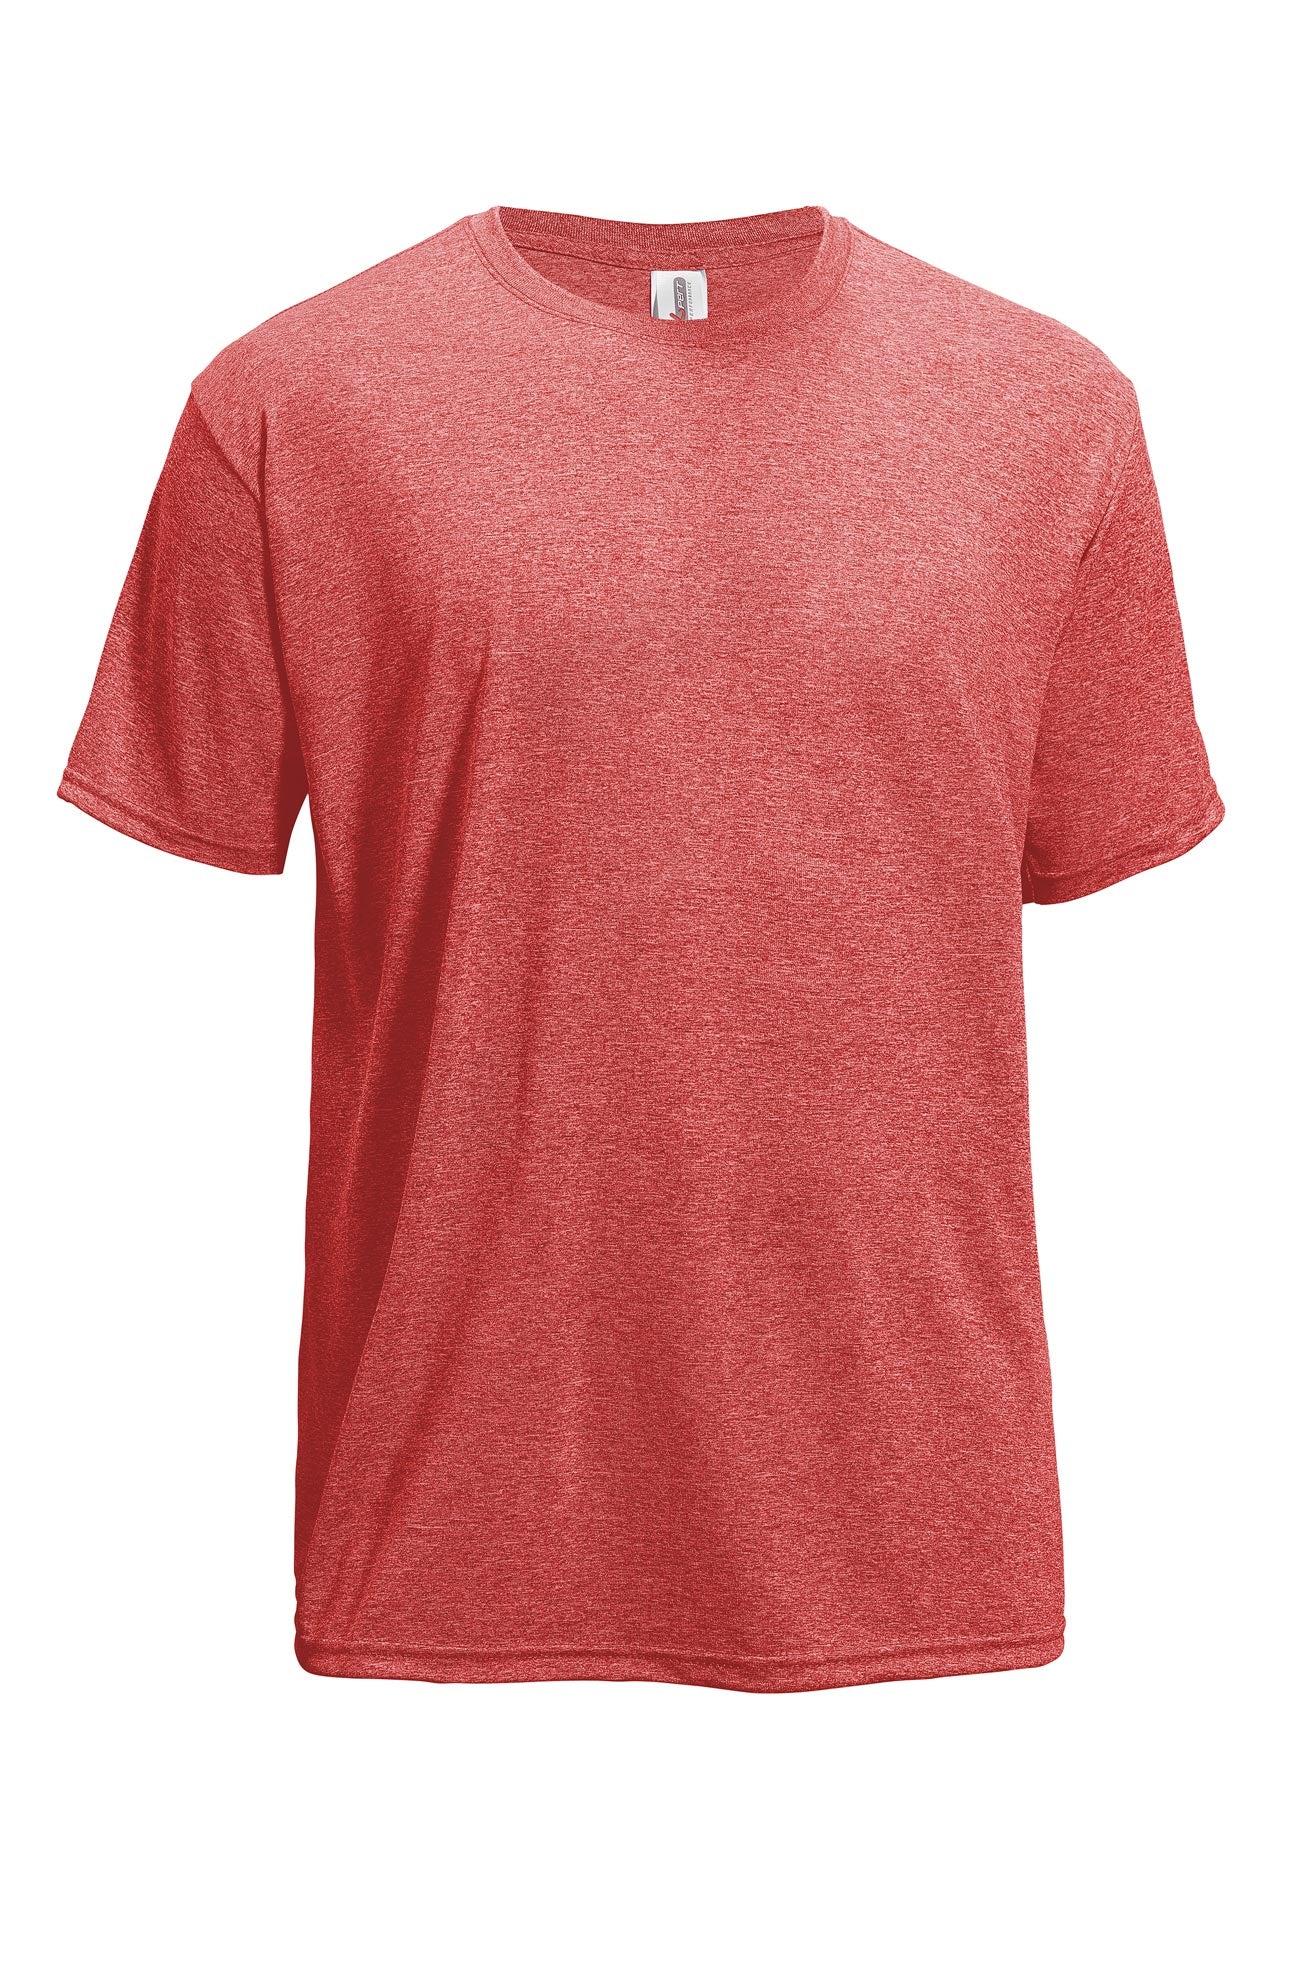 Expert Brand Retail Active Heather Tee in Red#color_heather-red